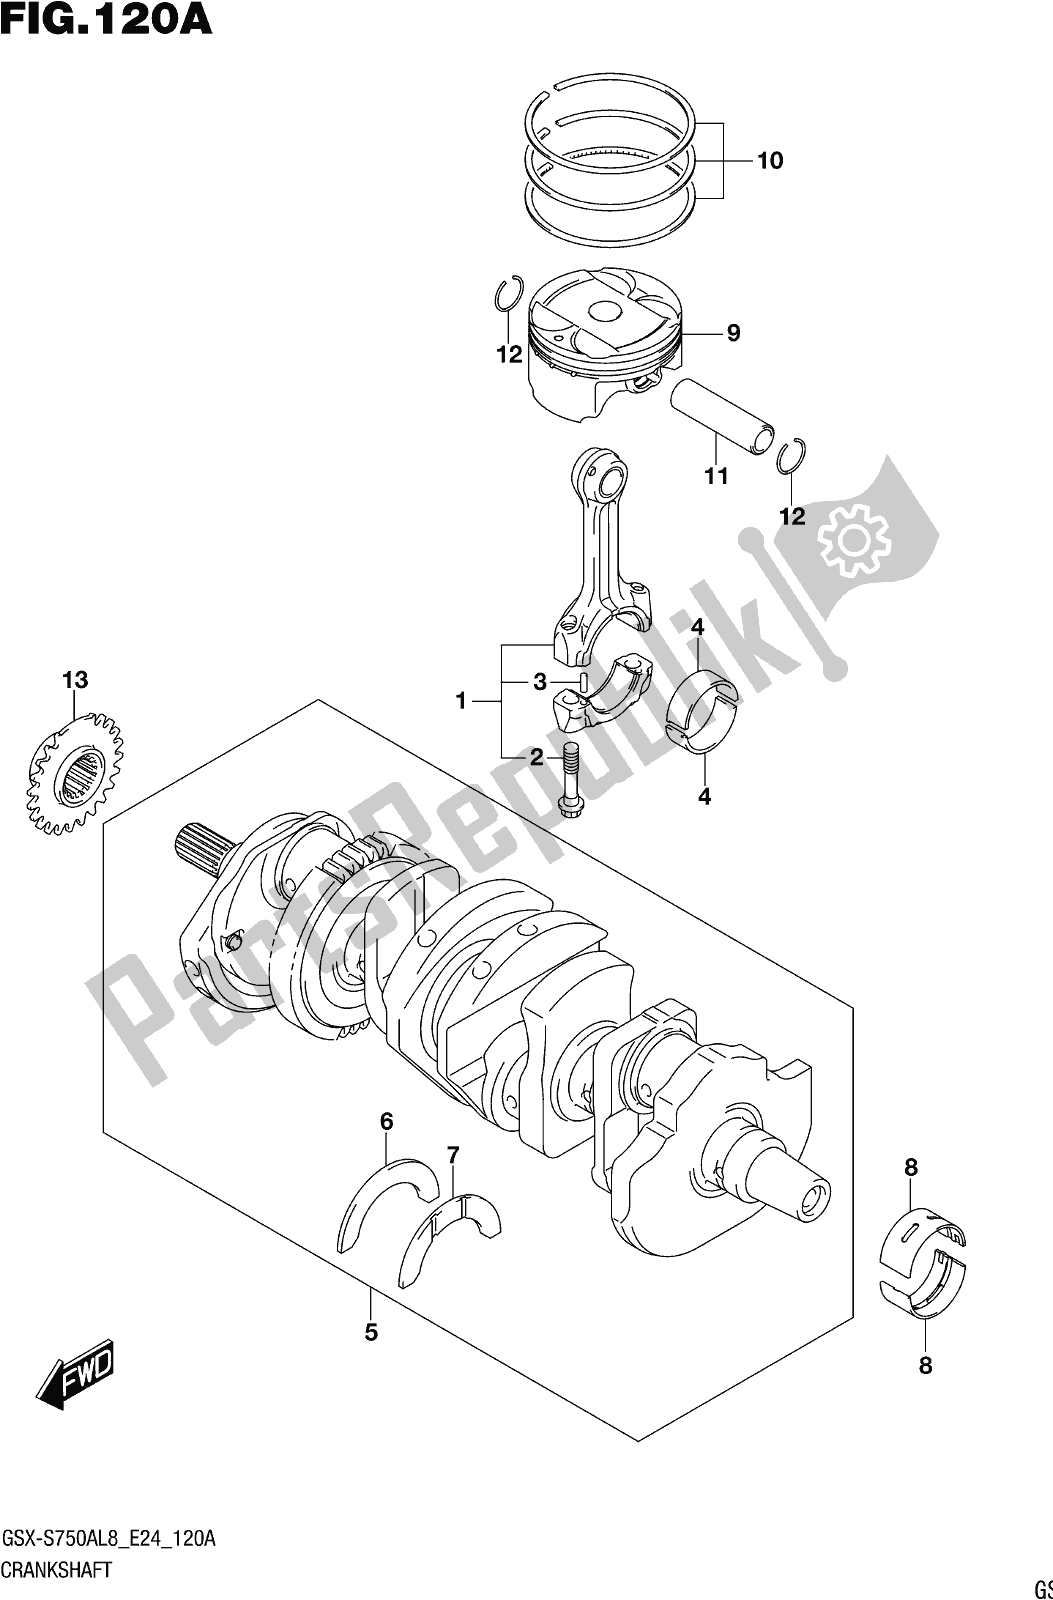 All parts for the Fig. 120a Crankshaft of the Suzuki Gsx-s 750A 2018